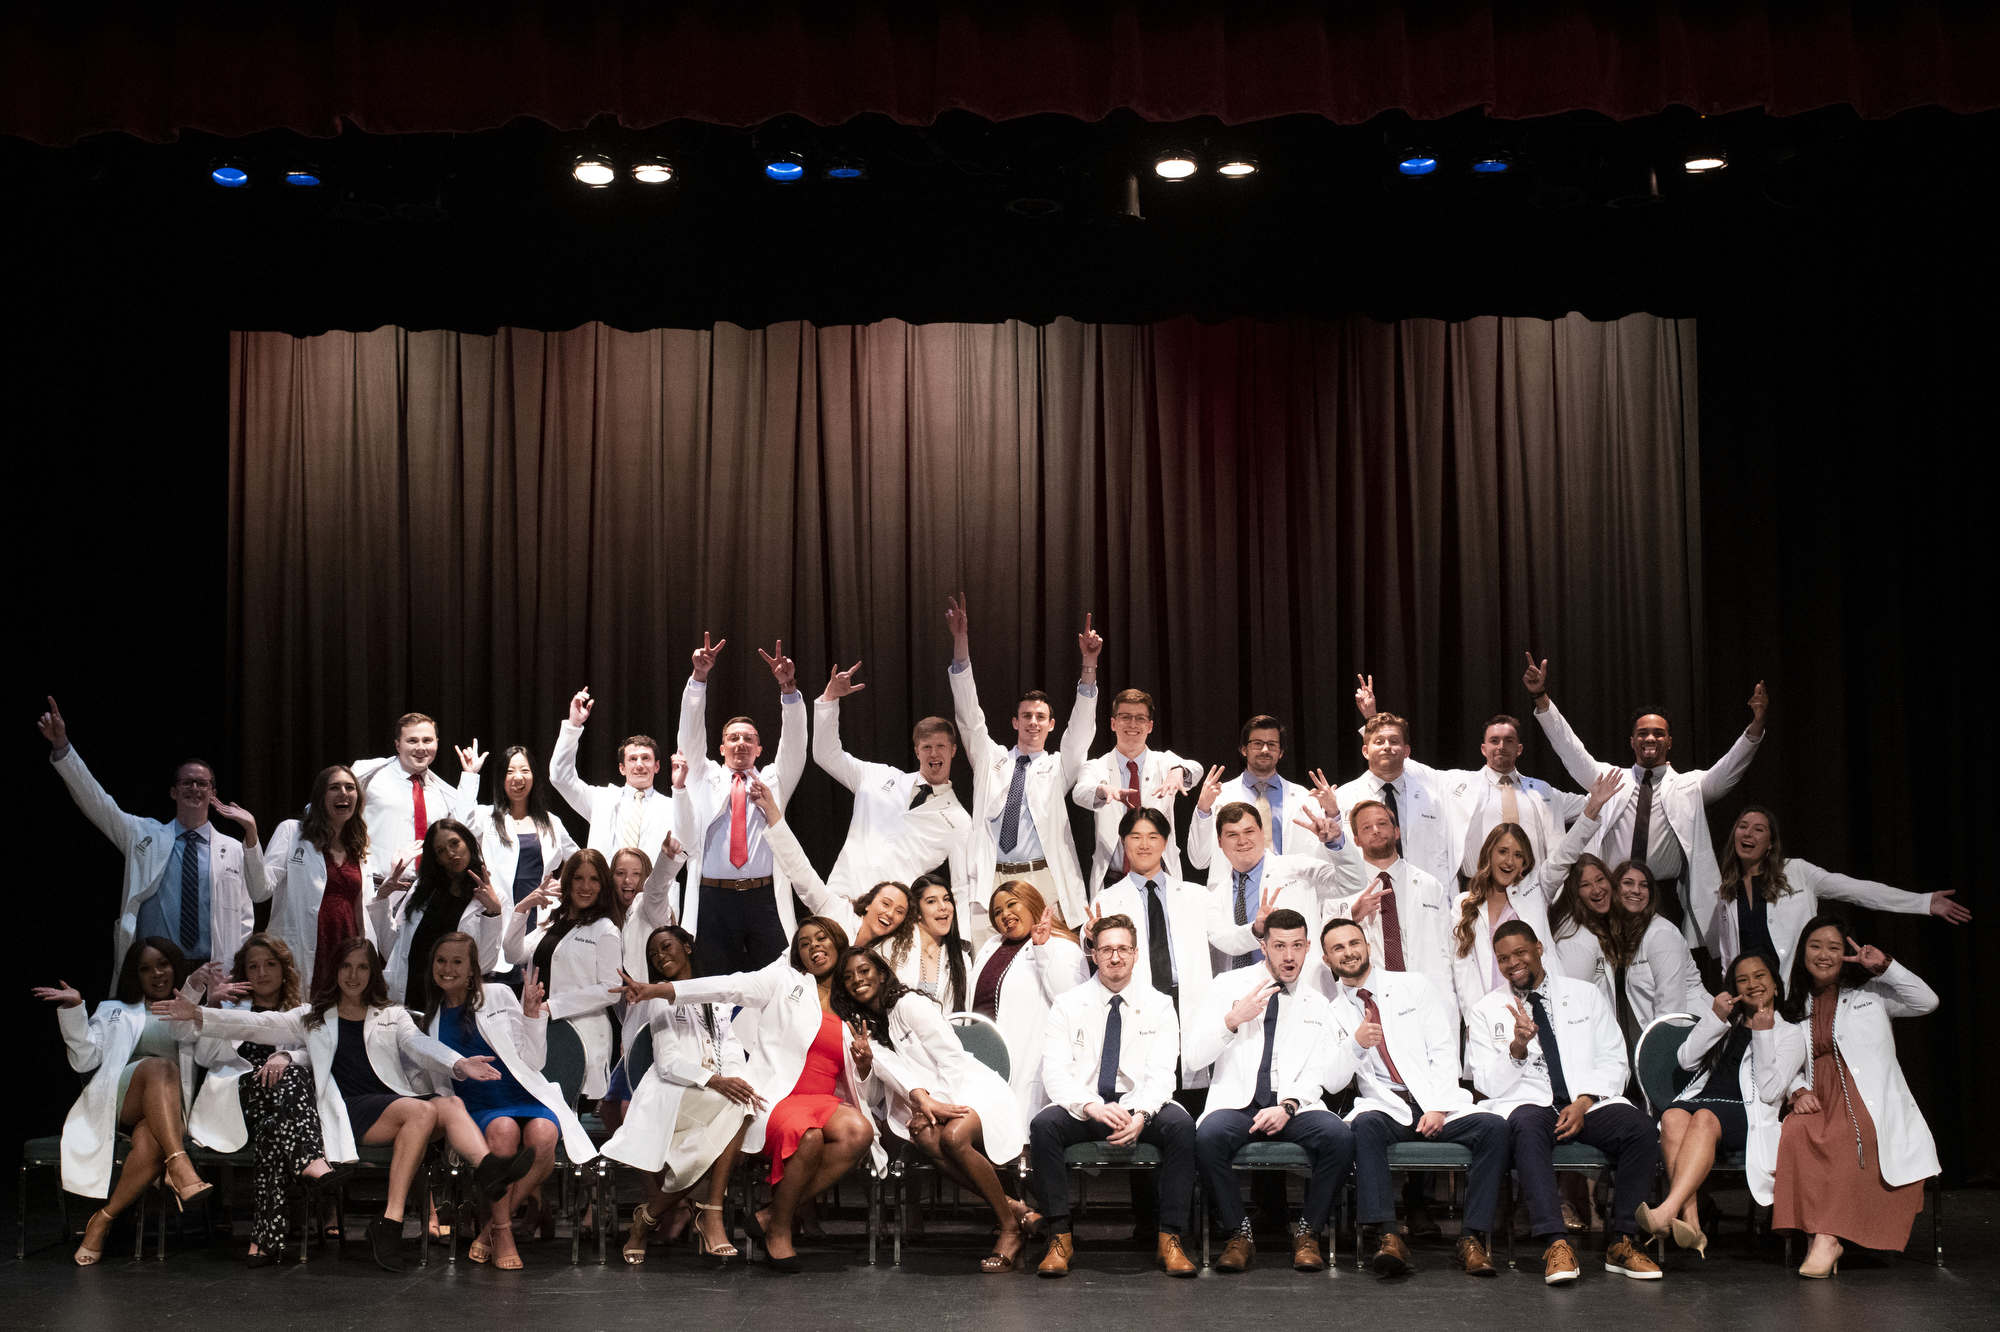 Physical therapy doctoral students pose for a photo after receiving their white coats